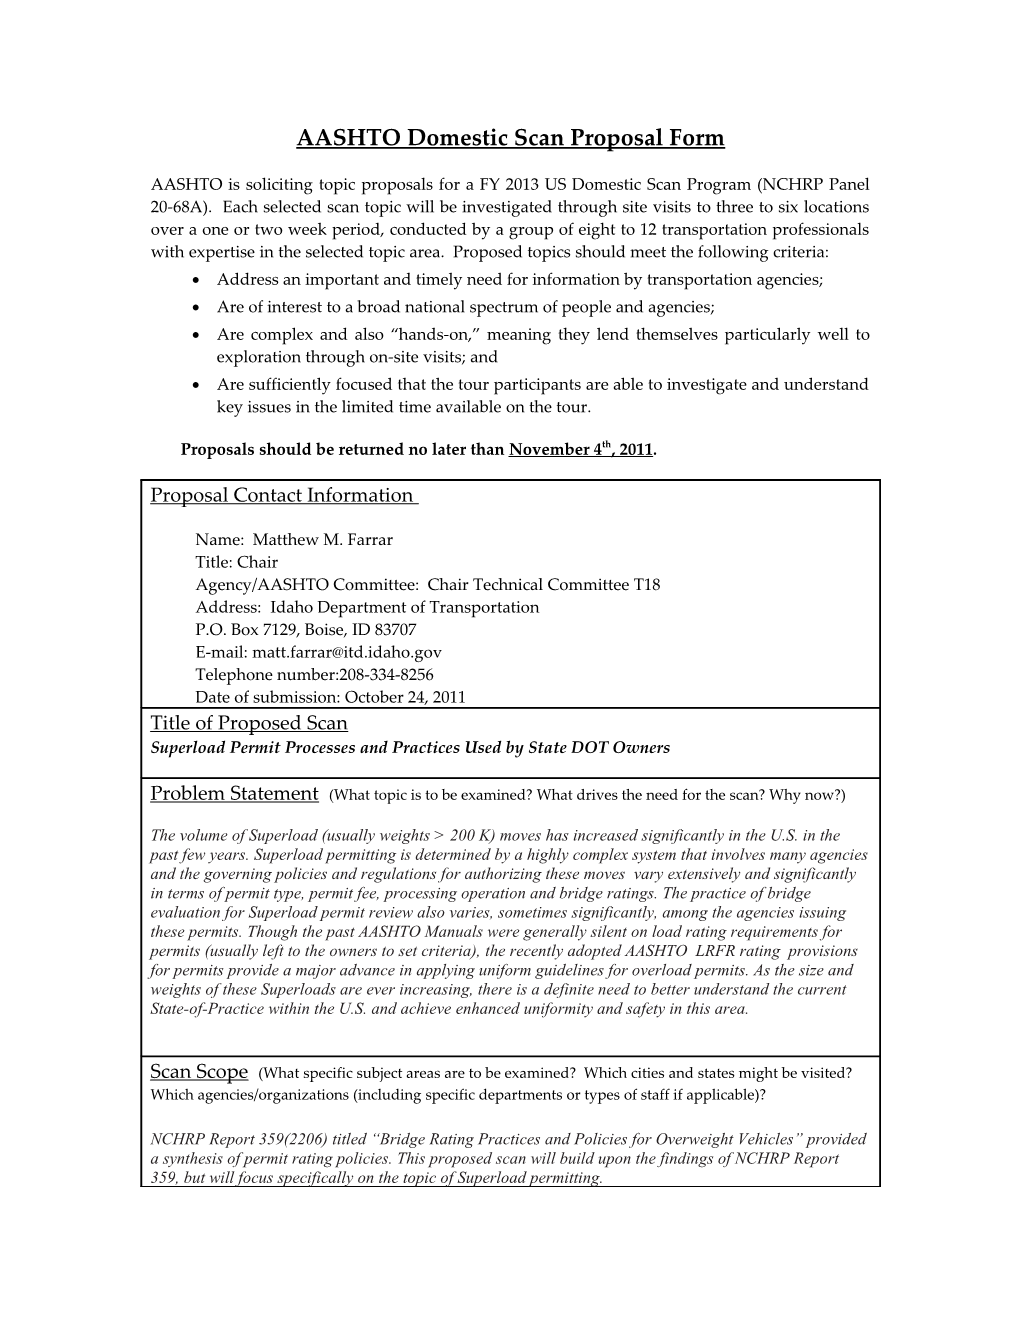 AASHTO Domestic Scan Proposal Form s3